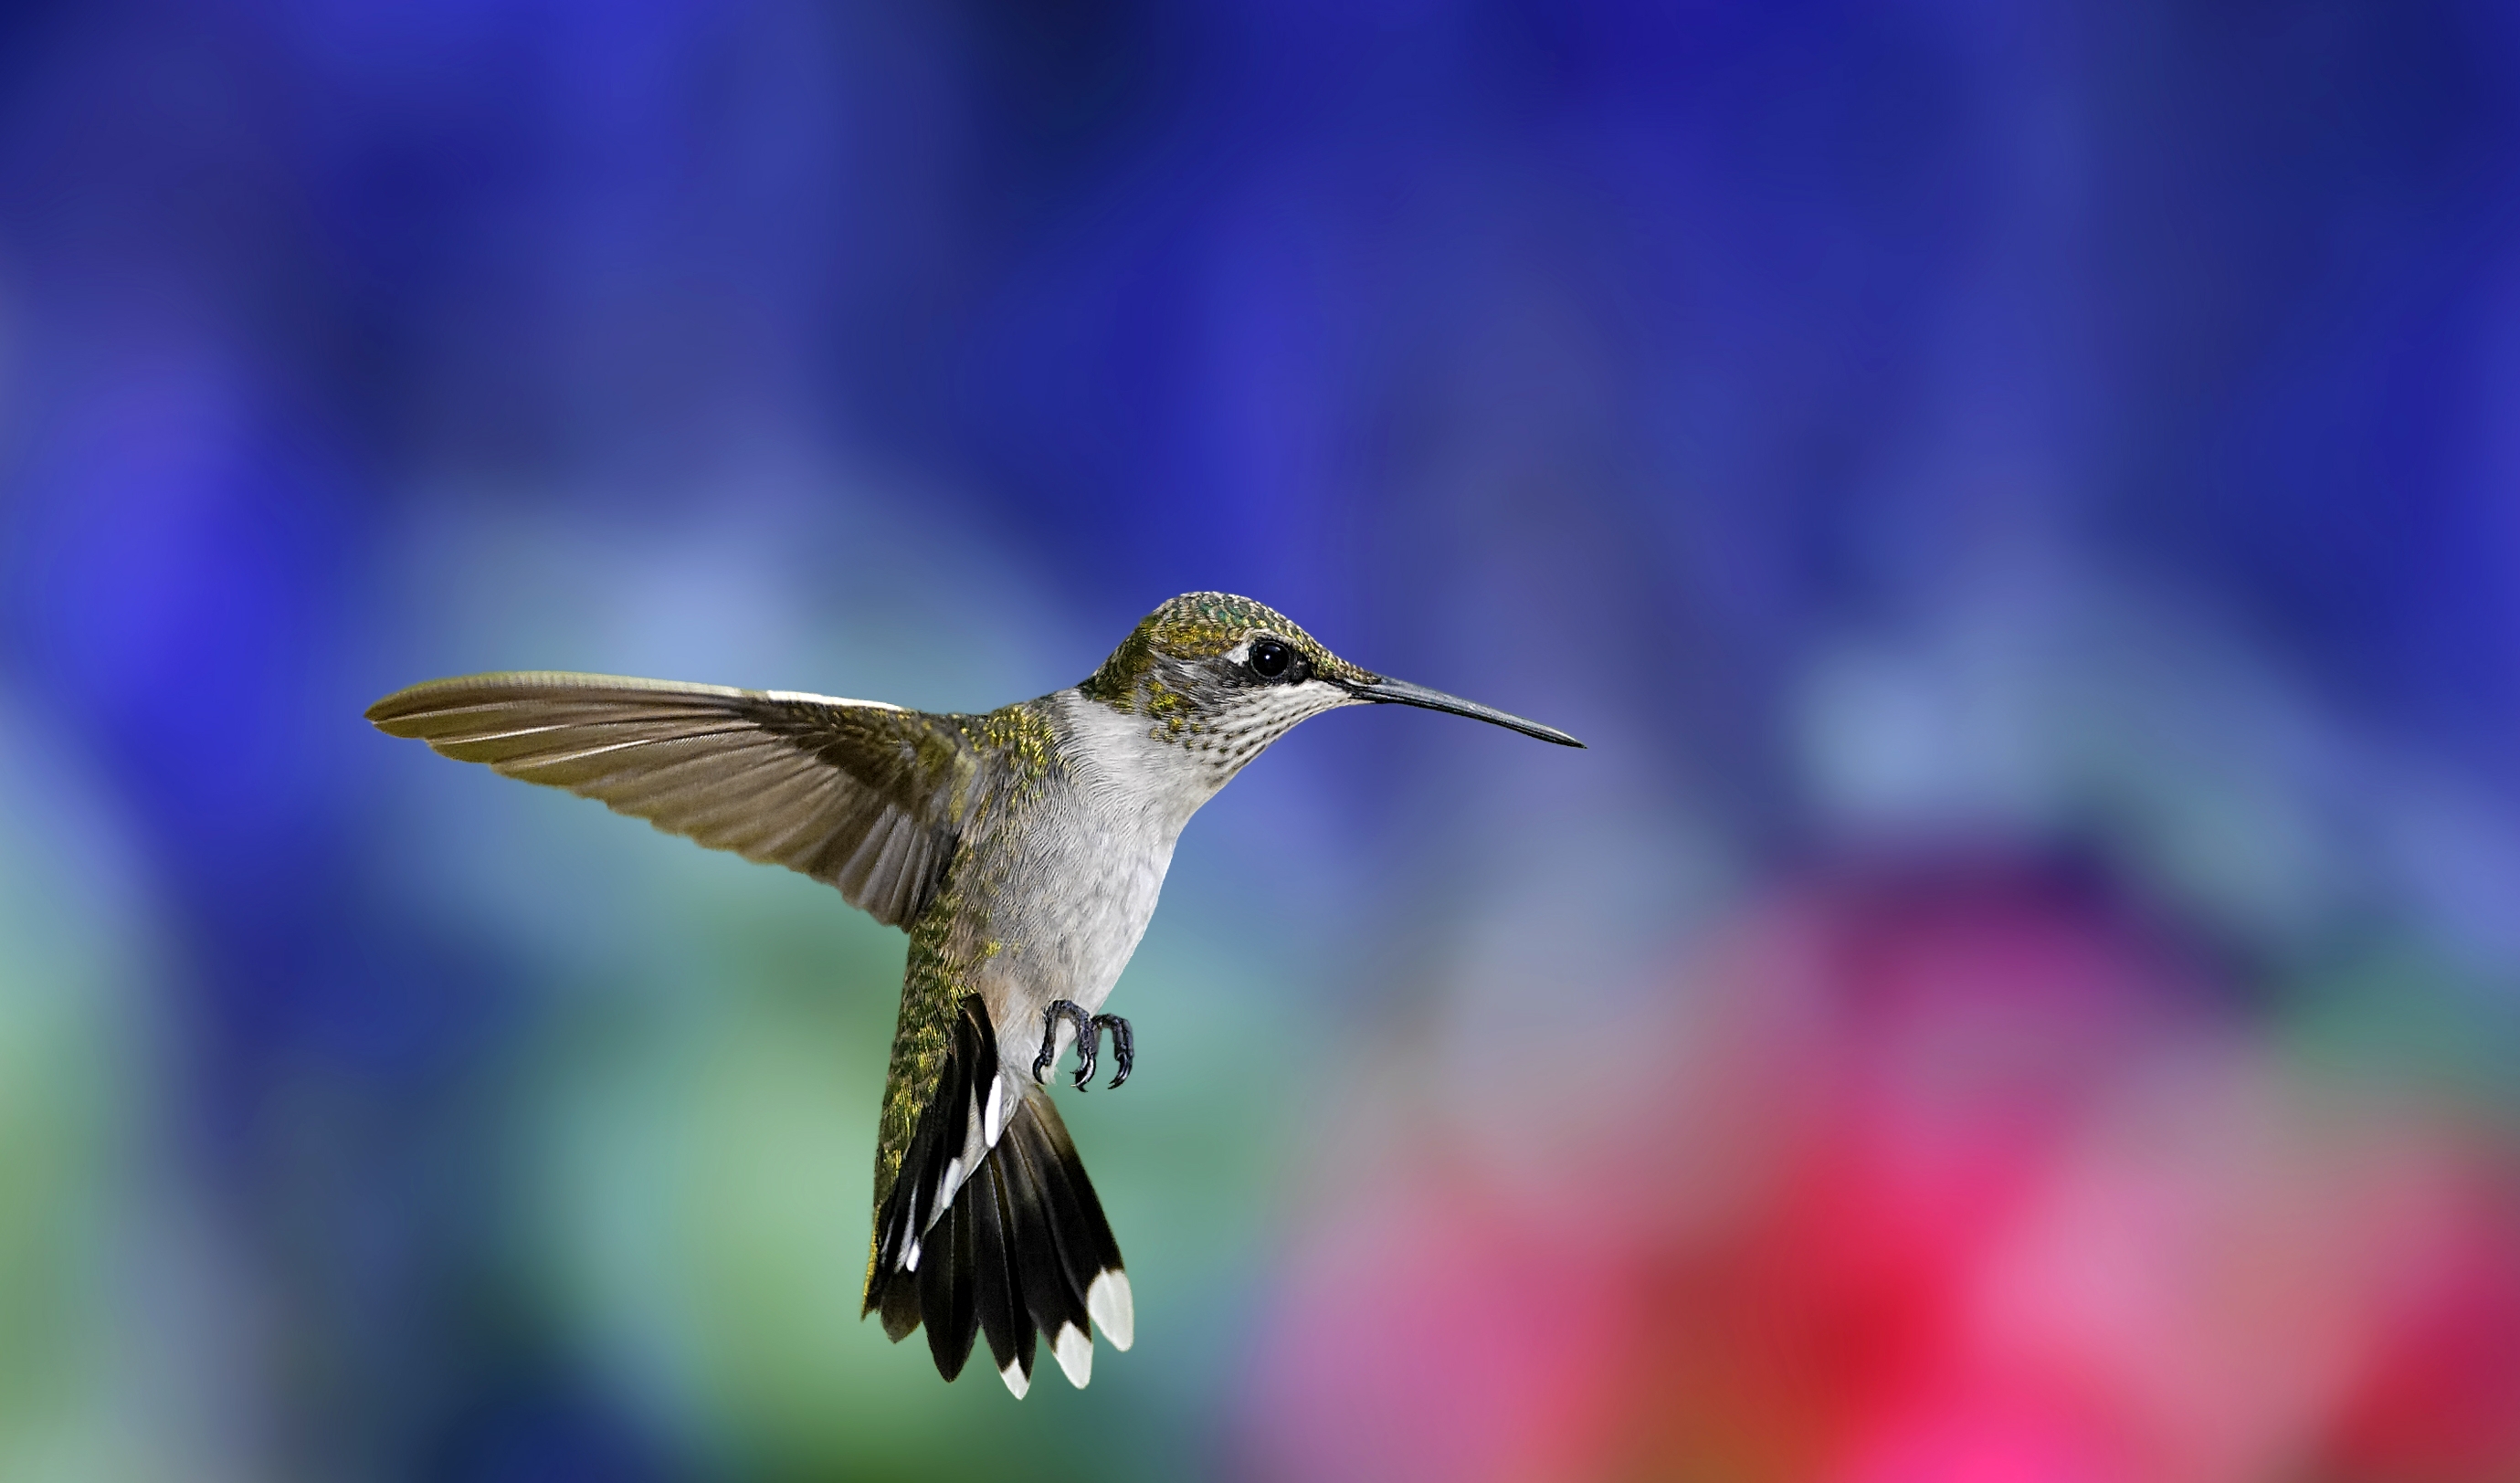 humming birds, animals, background, bird, blur, smooth, wings, wave, sweep